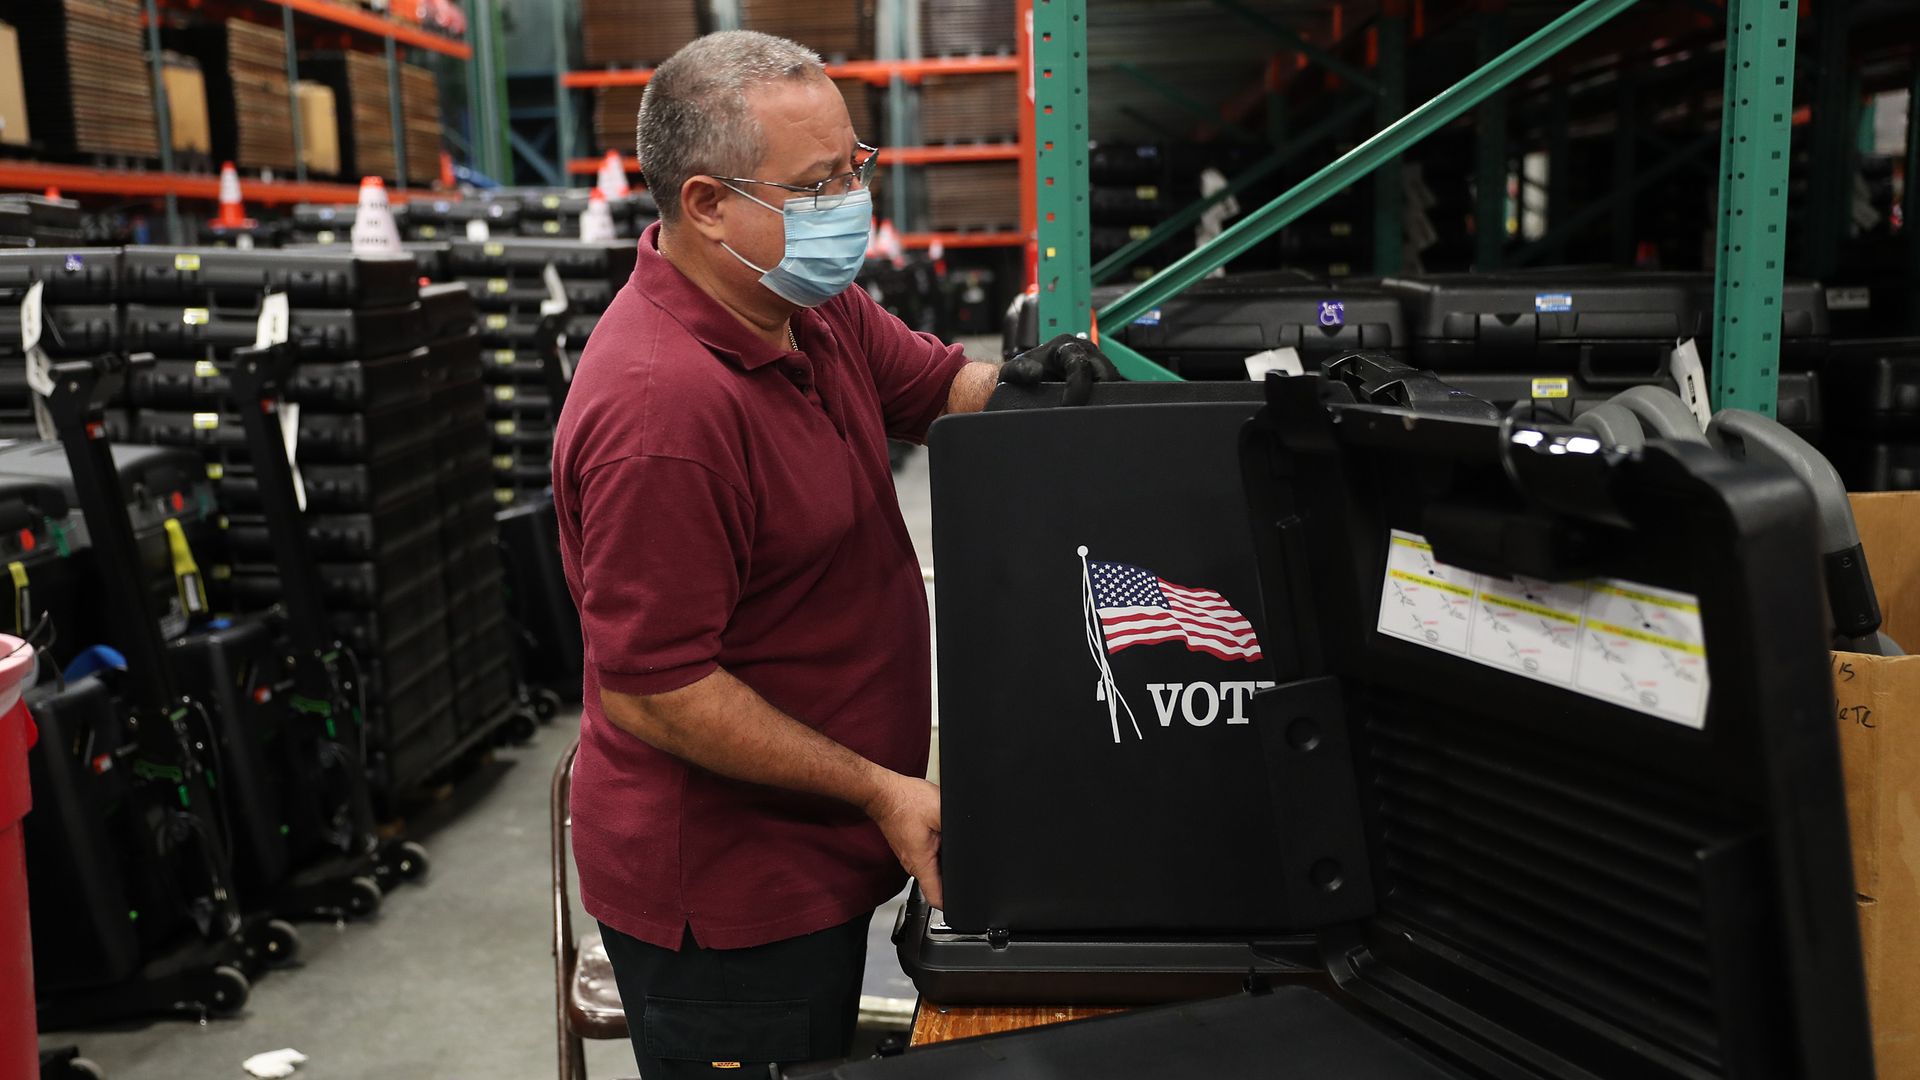 The Miami-Dade County Elections Department mailed out via the U.S. Post Office more than 530,000 vote-by-mail ballots to voters with a request on file for the November 3, 2020 General Election